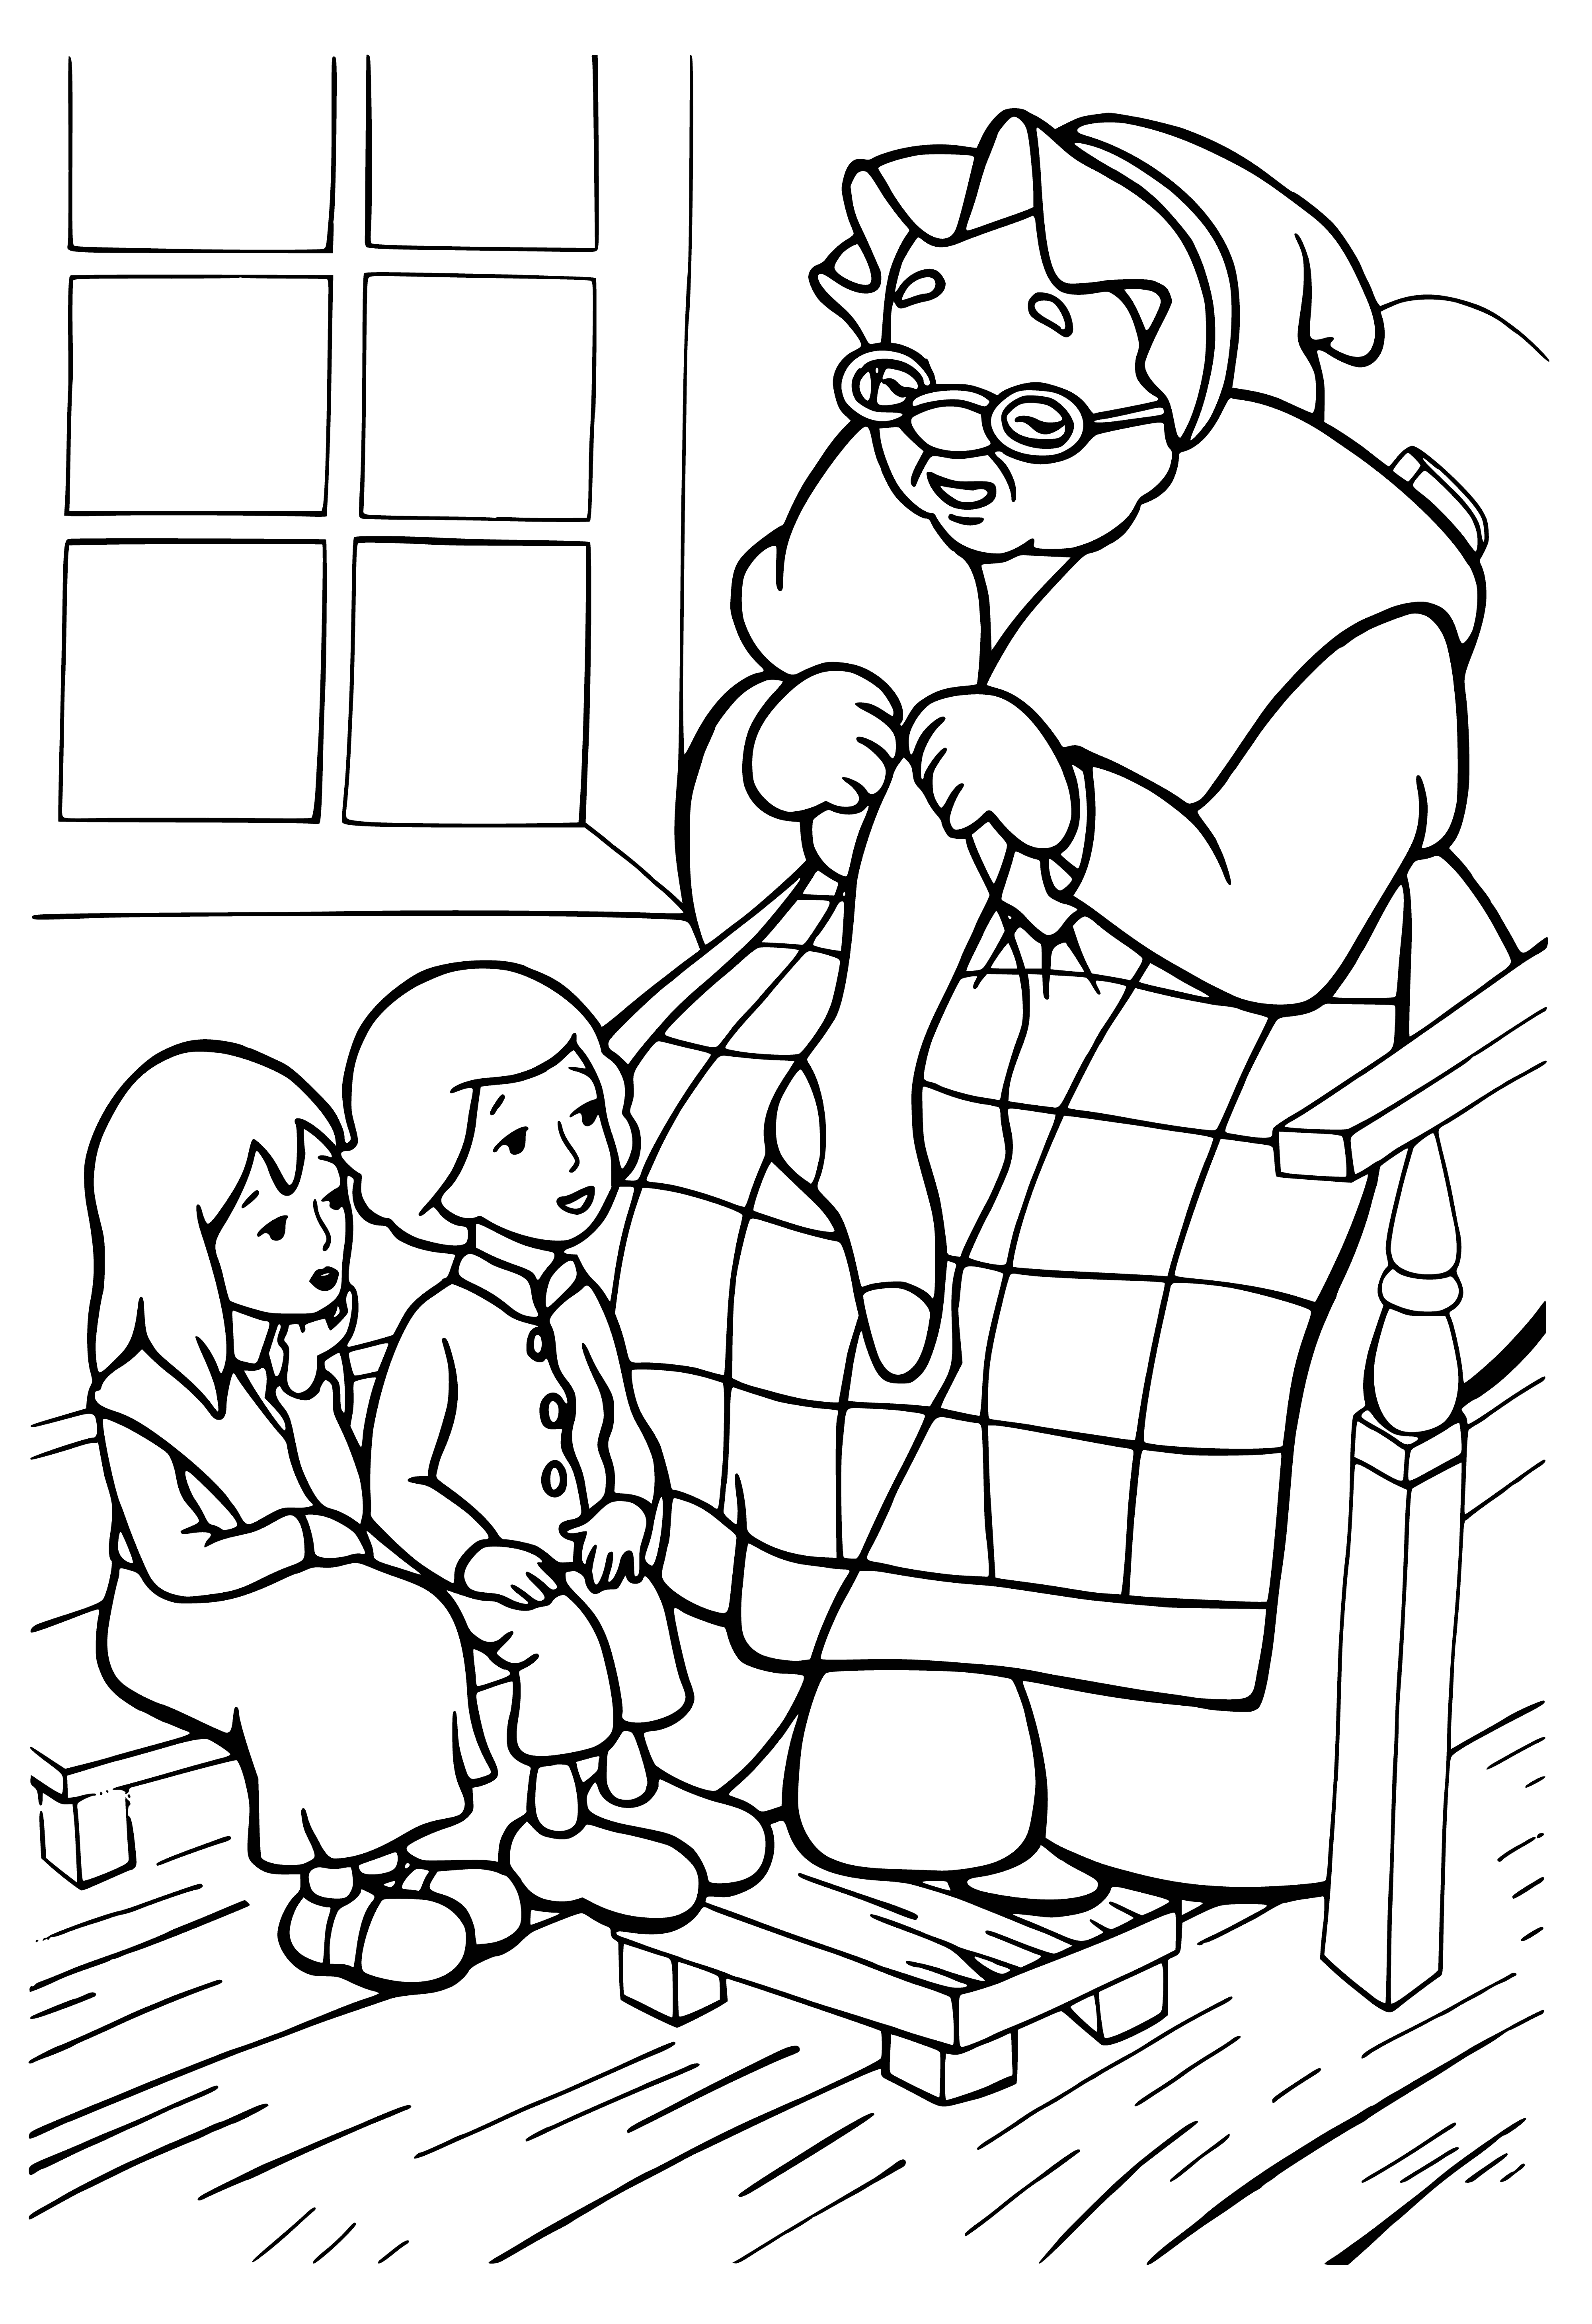 coloring page: Kai & Gerda stand sadly by a window, arms crossed & hands clasped, a white rabbit beside them. #TheSnowQueen